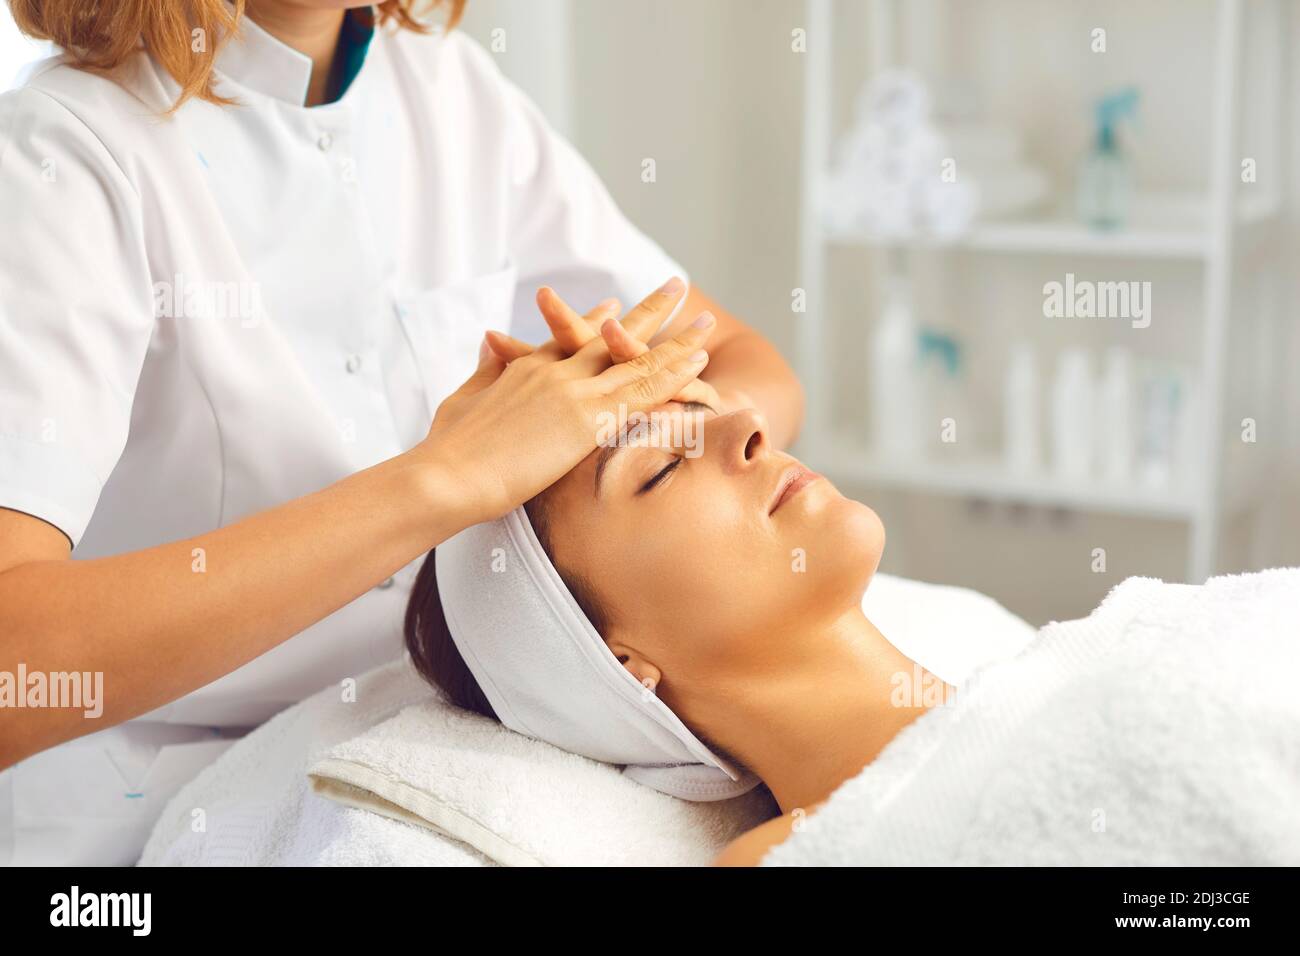 Hands of cosmetologist making facial massage for relaxed serene young woman Stock Photo